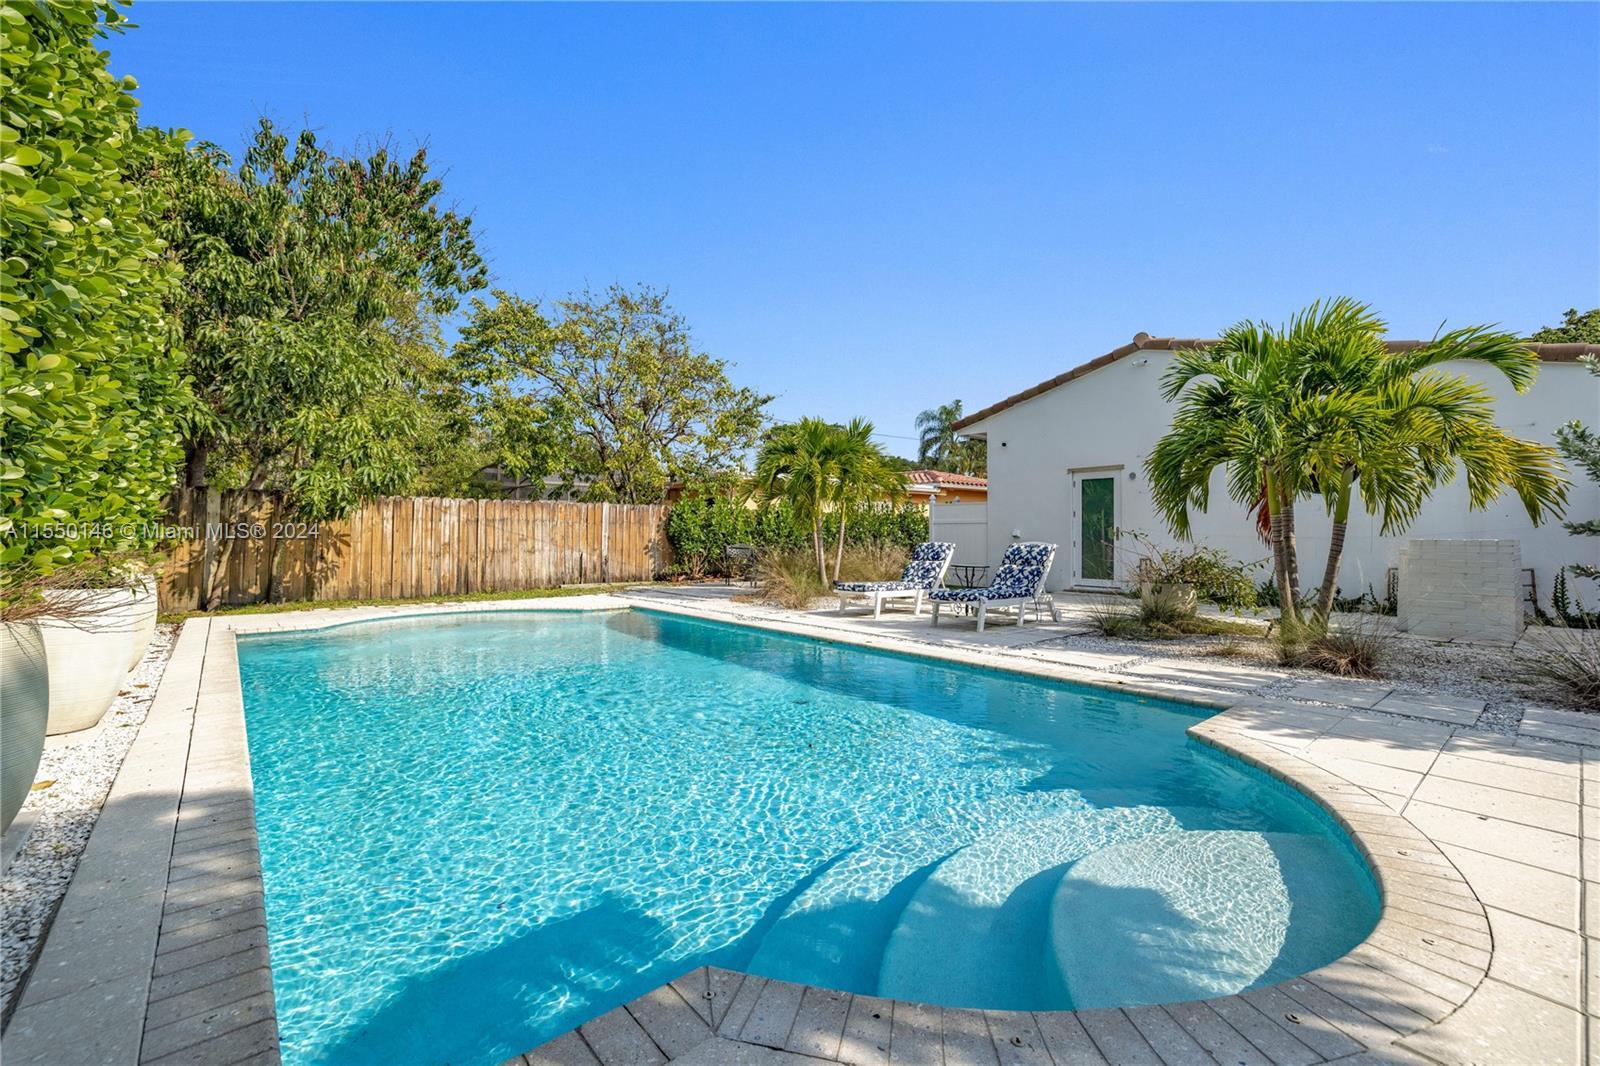 Lovely boutique home in a quiet bird sanctuary of Biscayne Park…and close to everything!...beaches&s